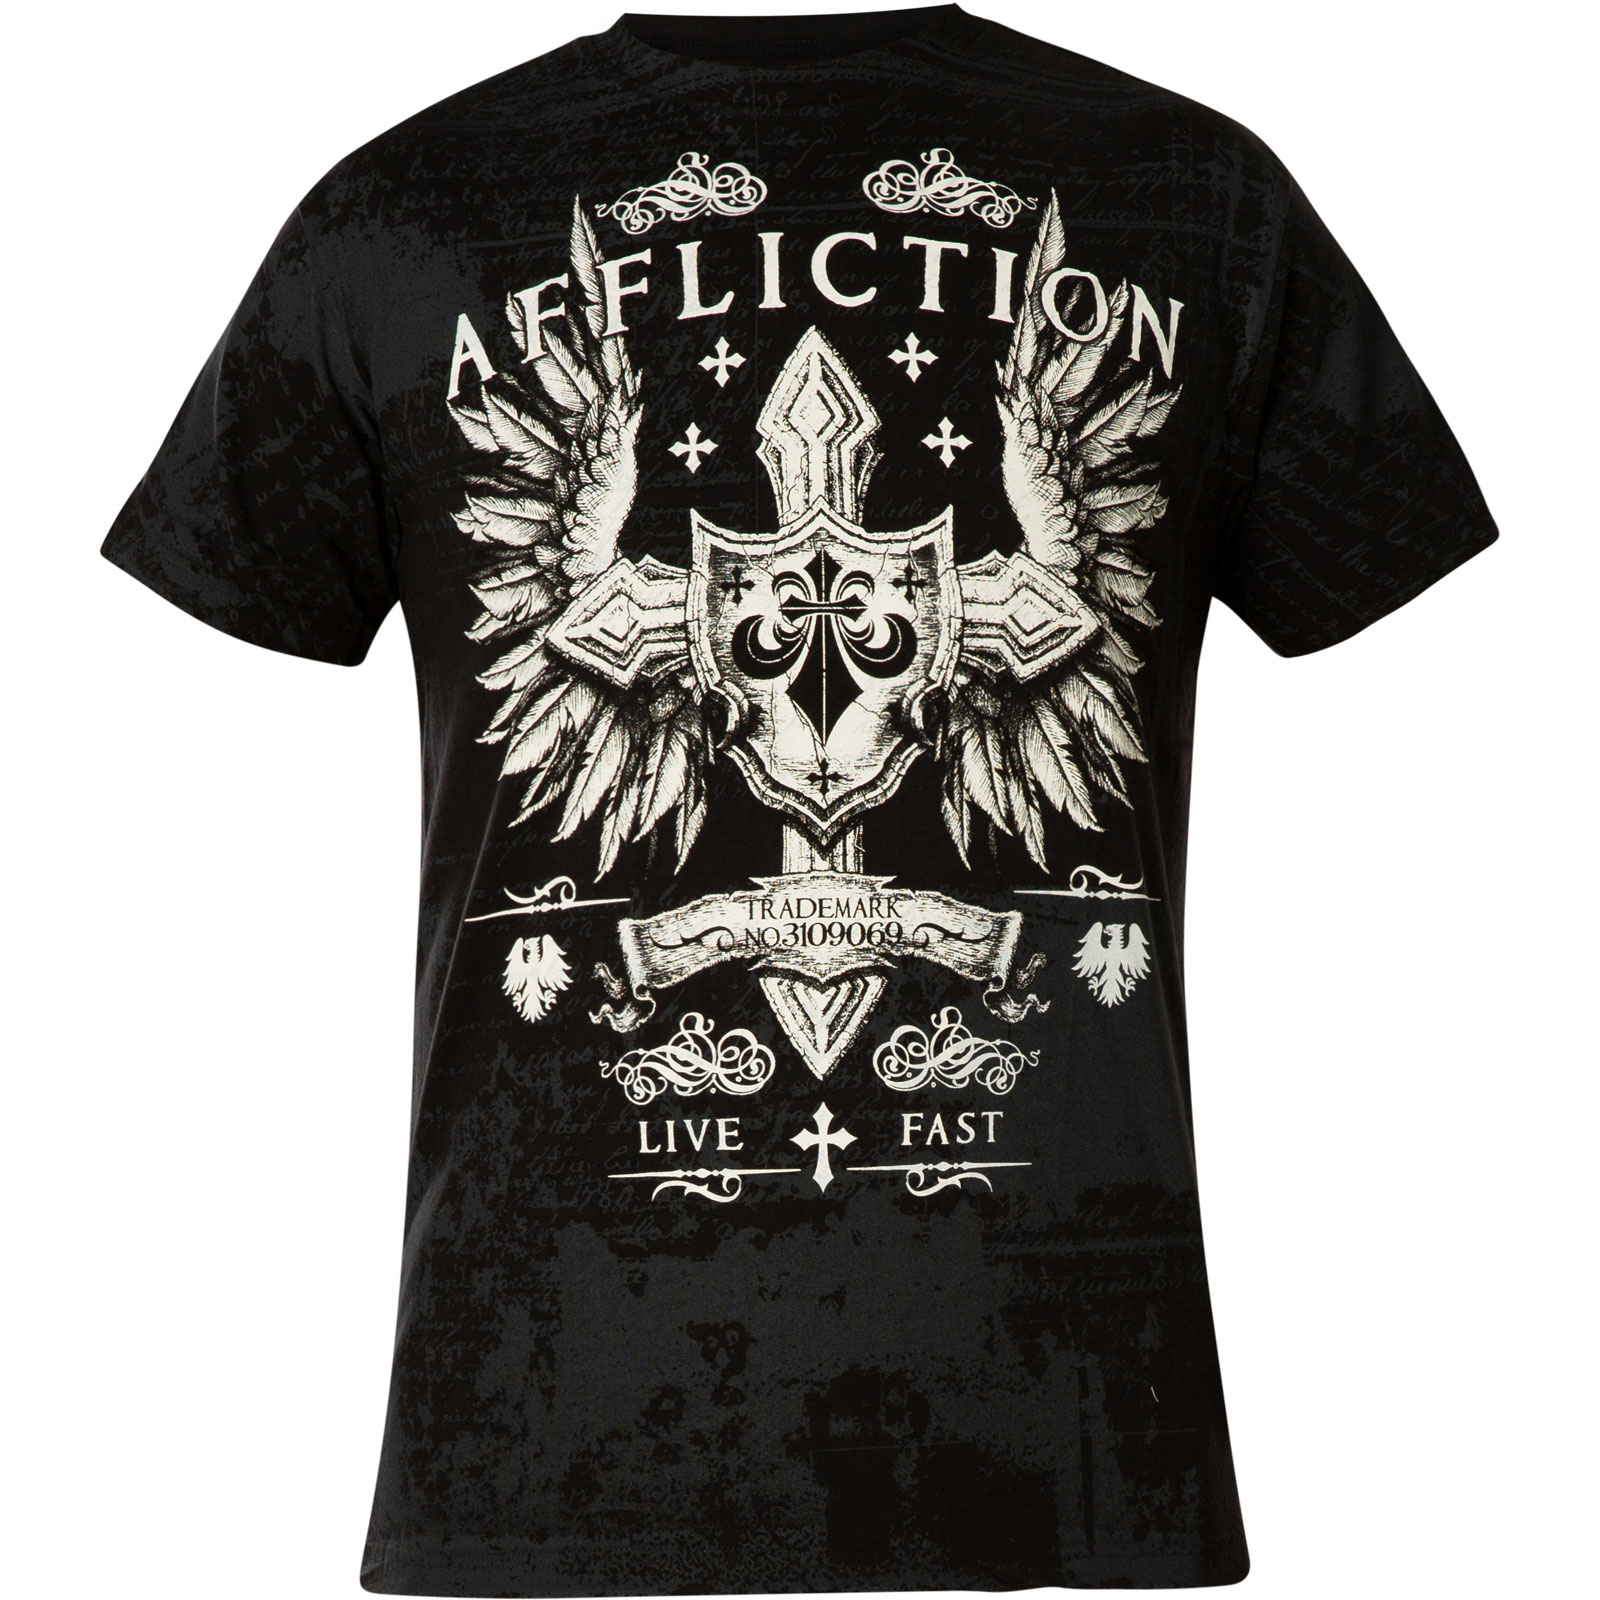 Affliction Simulation T-Shirt with large highly detailed all over print